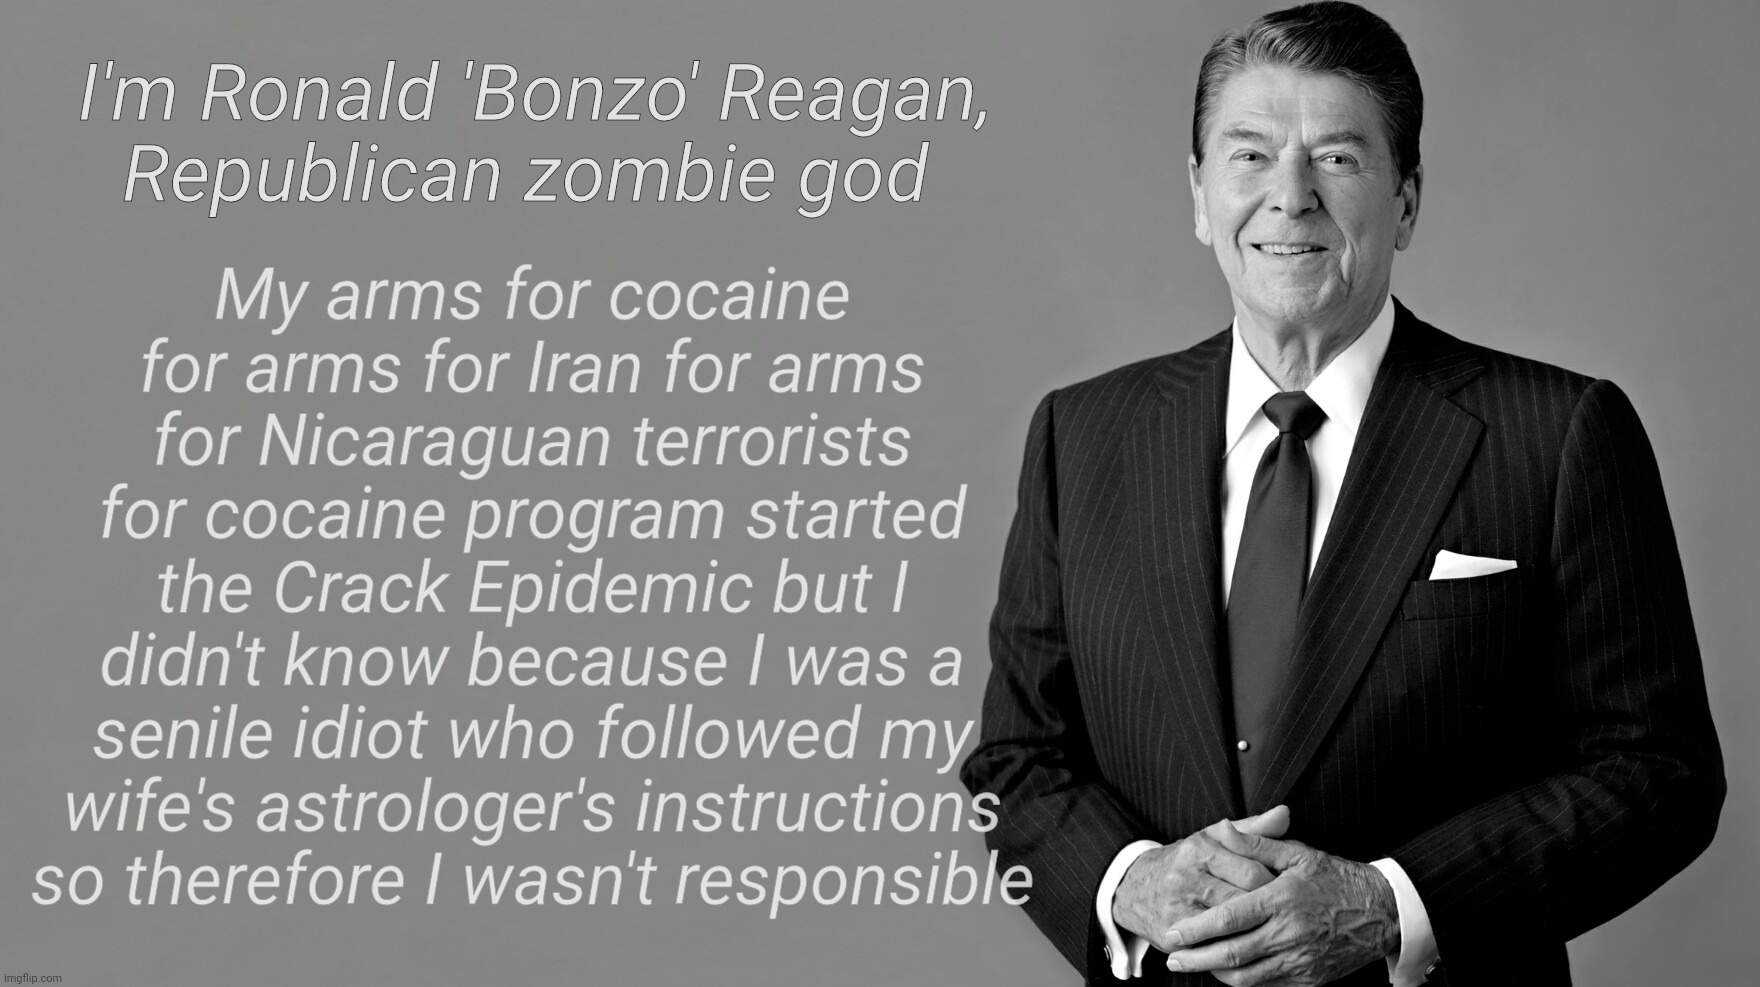 Biggest cocaine dealer in history,,, | I'm Ronald 'Bonzo' Reagan,
Republican zombie god; My arms for cocaine for arms for Iran for arms for Nicaraguan terrorists for cocaine program started the Crack Epidemic but I didn't know because I was a senile idiot who followed my wife's astrologer's instructions so therefore I wasn't responsible | image tagged in ronald reagan,biggest coke dealer in history,arms for hostages,hostages for cocaine,cocaine for arms,and repeat | made w/ Imgflip meme maker